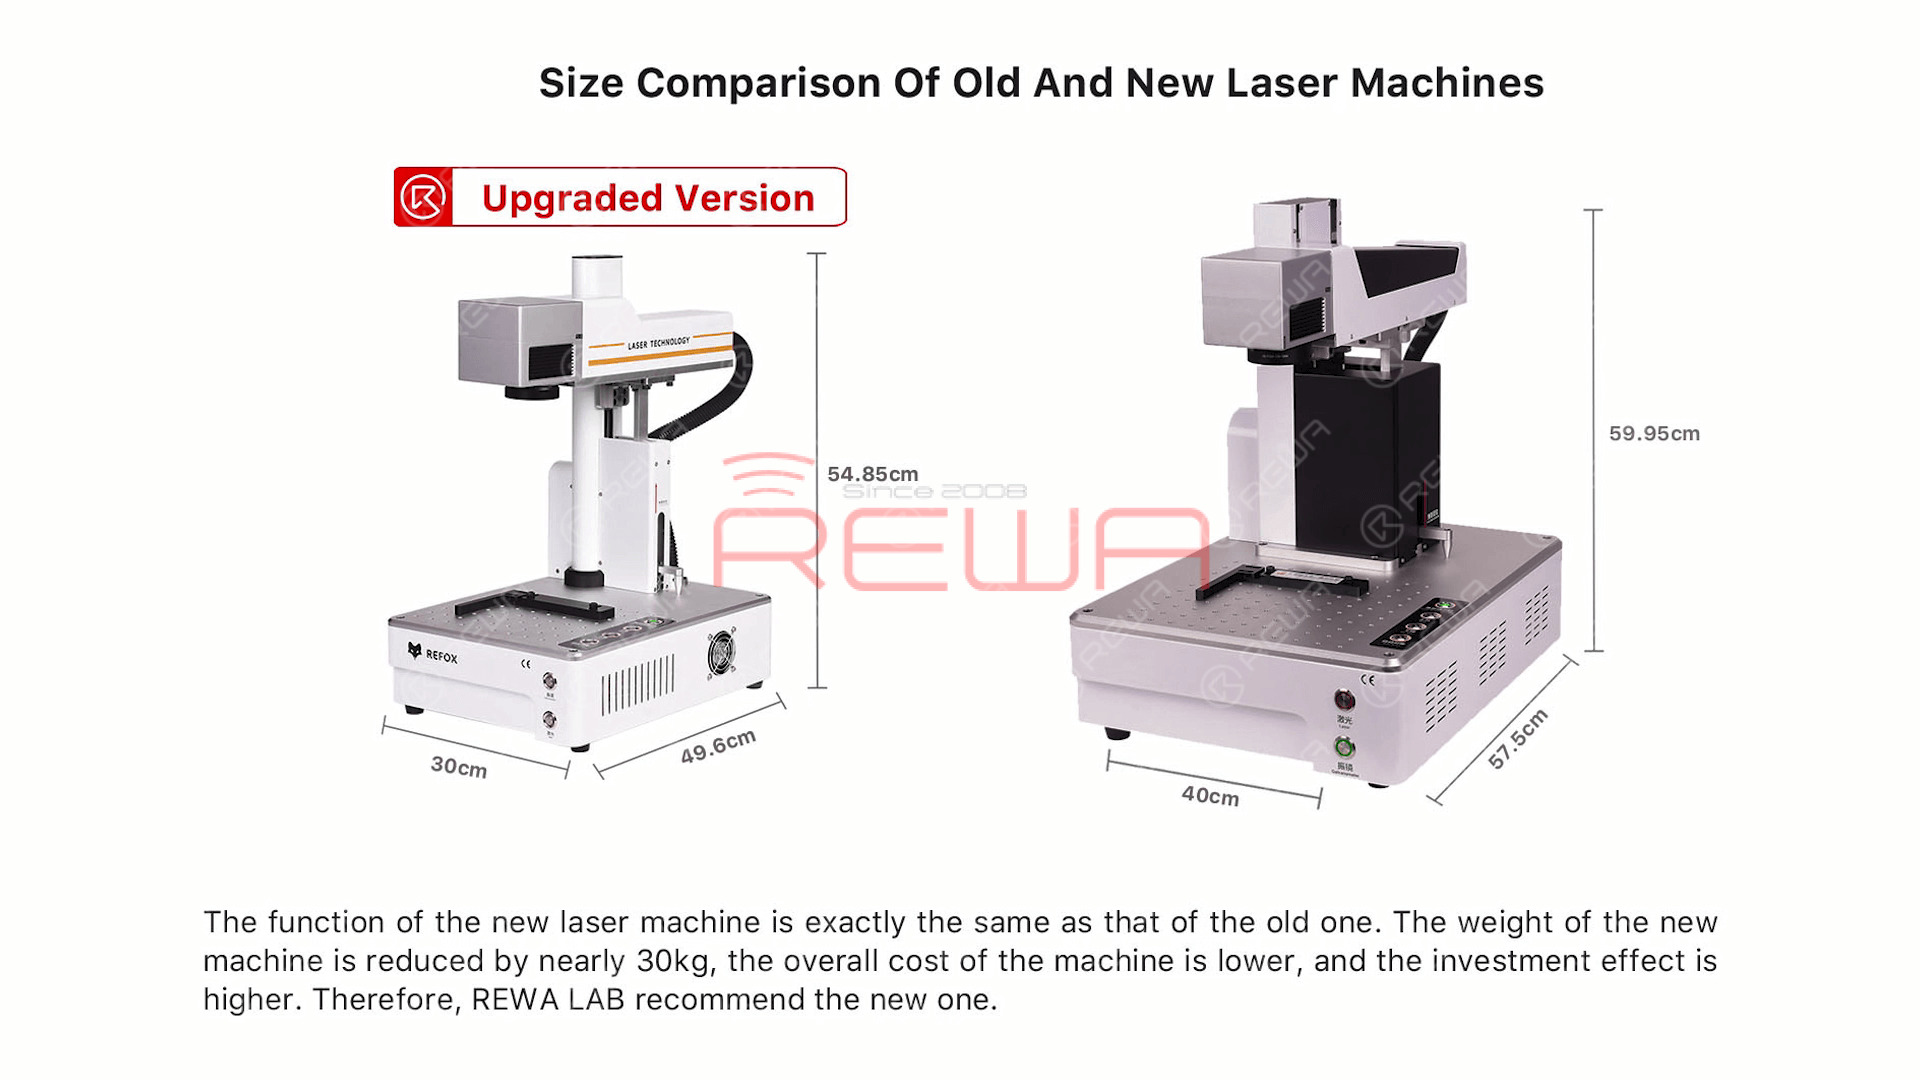 After a year of upgrades, REWA LAB once again selected an upgraded version laser machine that has a smaller size, lower cost, and identical performance.